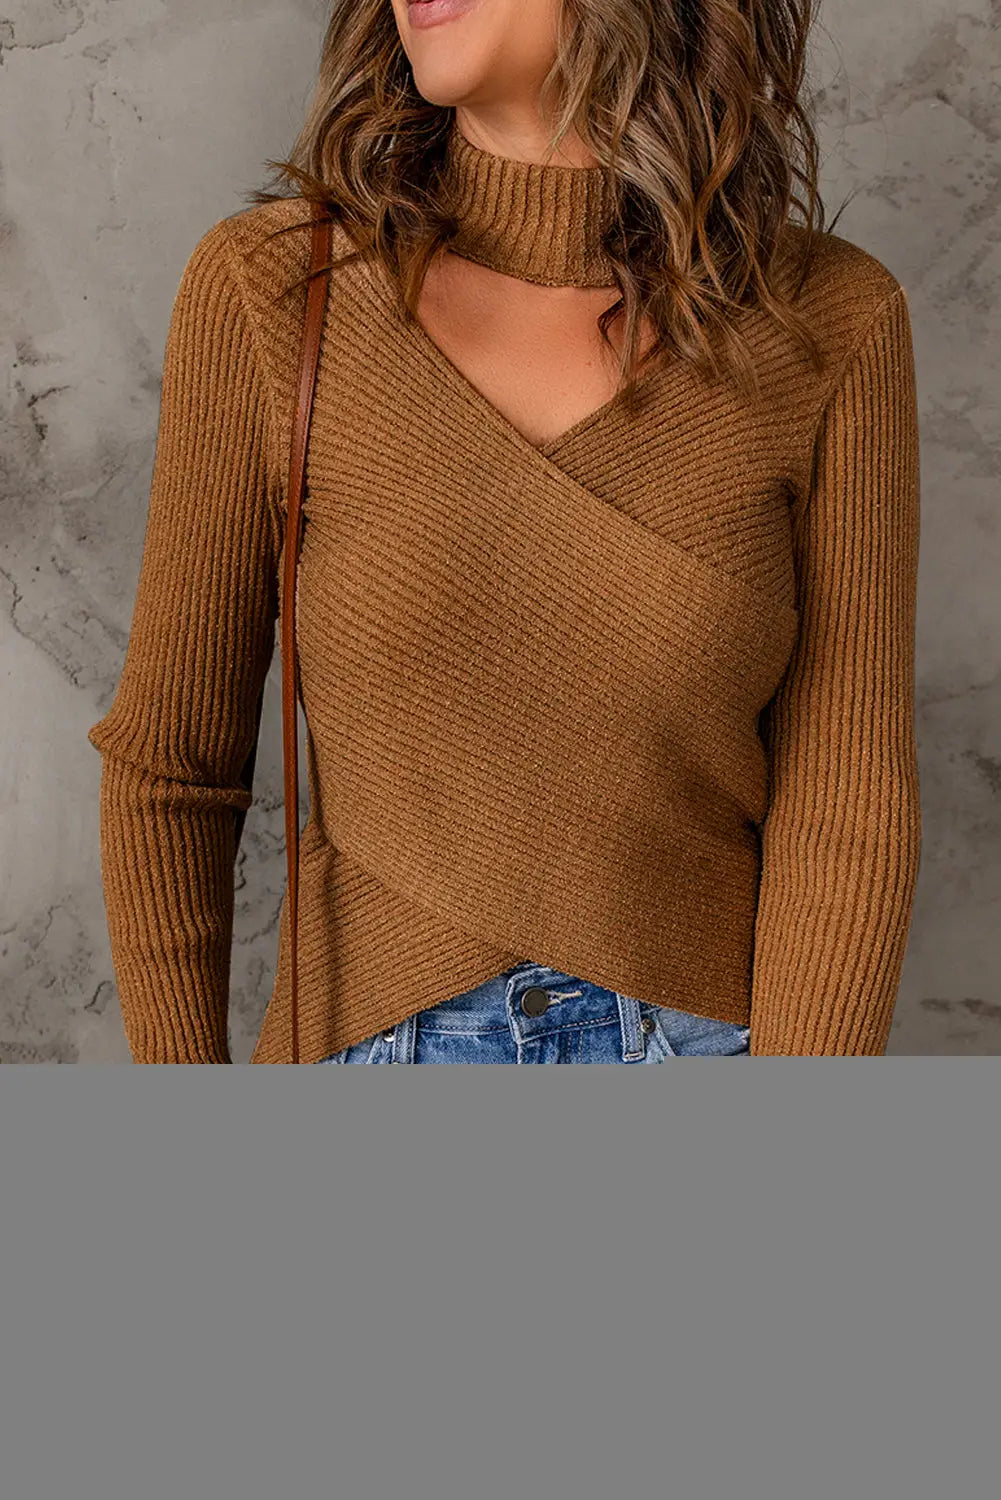 Khaki high neck hollow-out crossed wrap knit sweater - s / 100% polyester - sweaters & cardigans